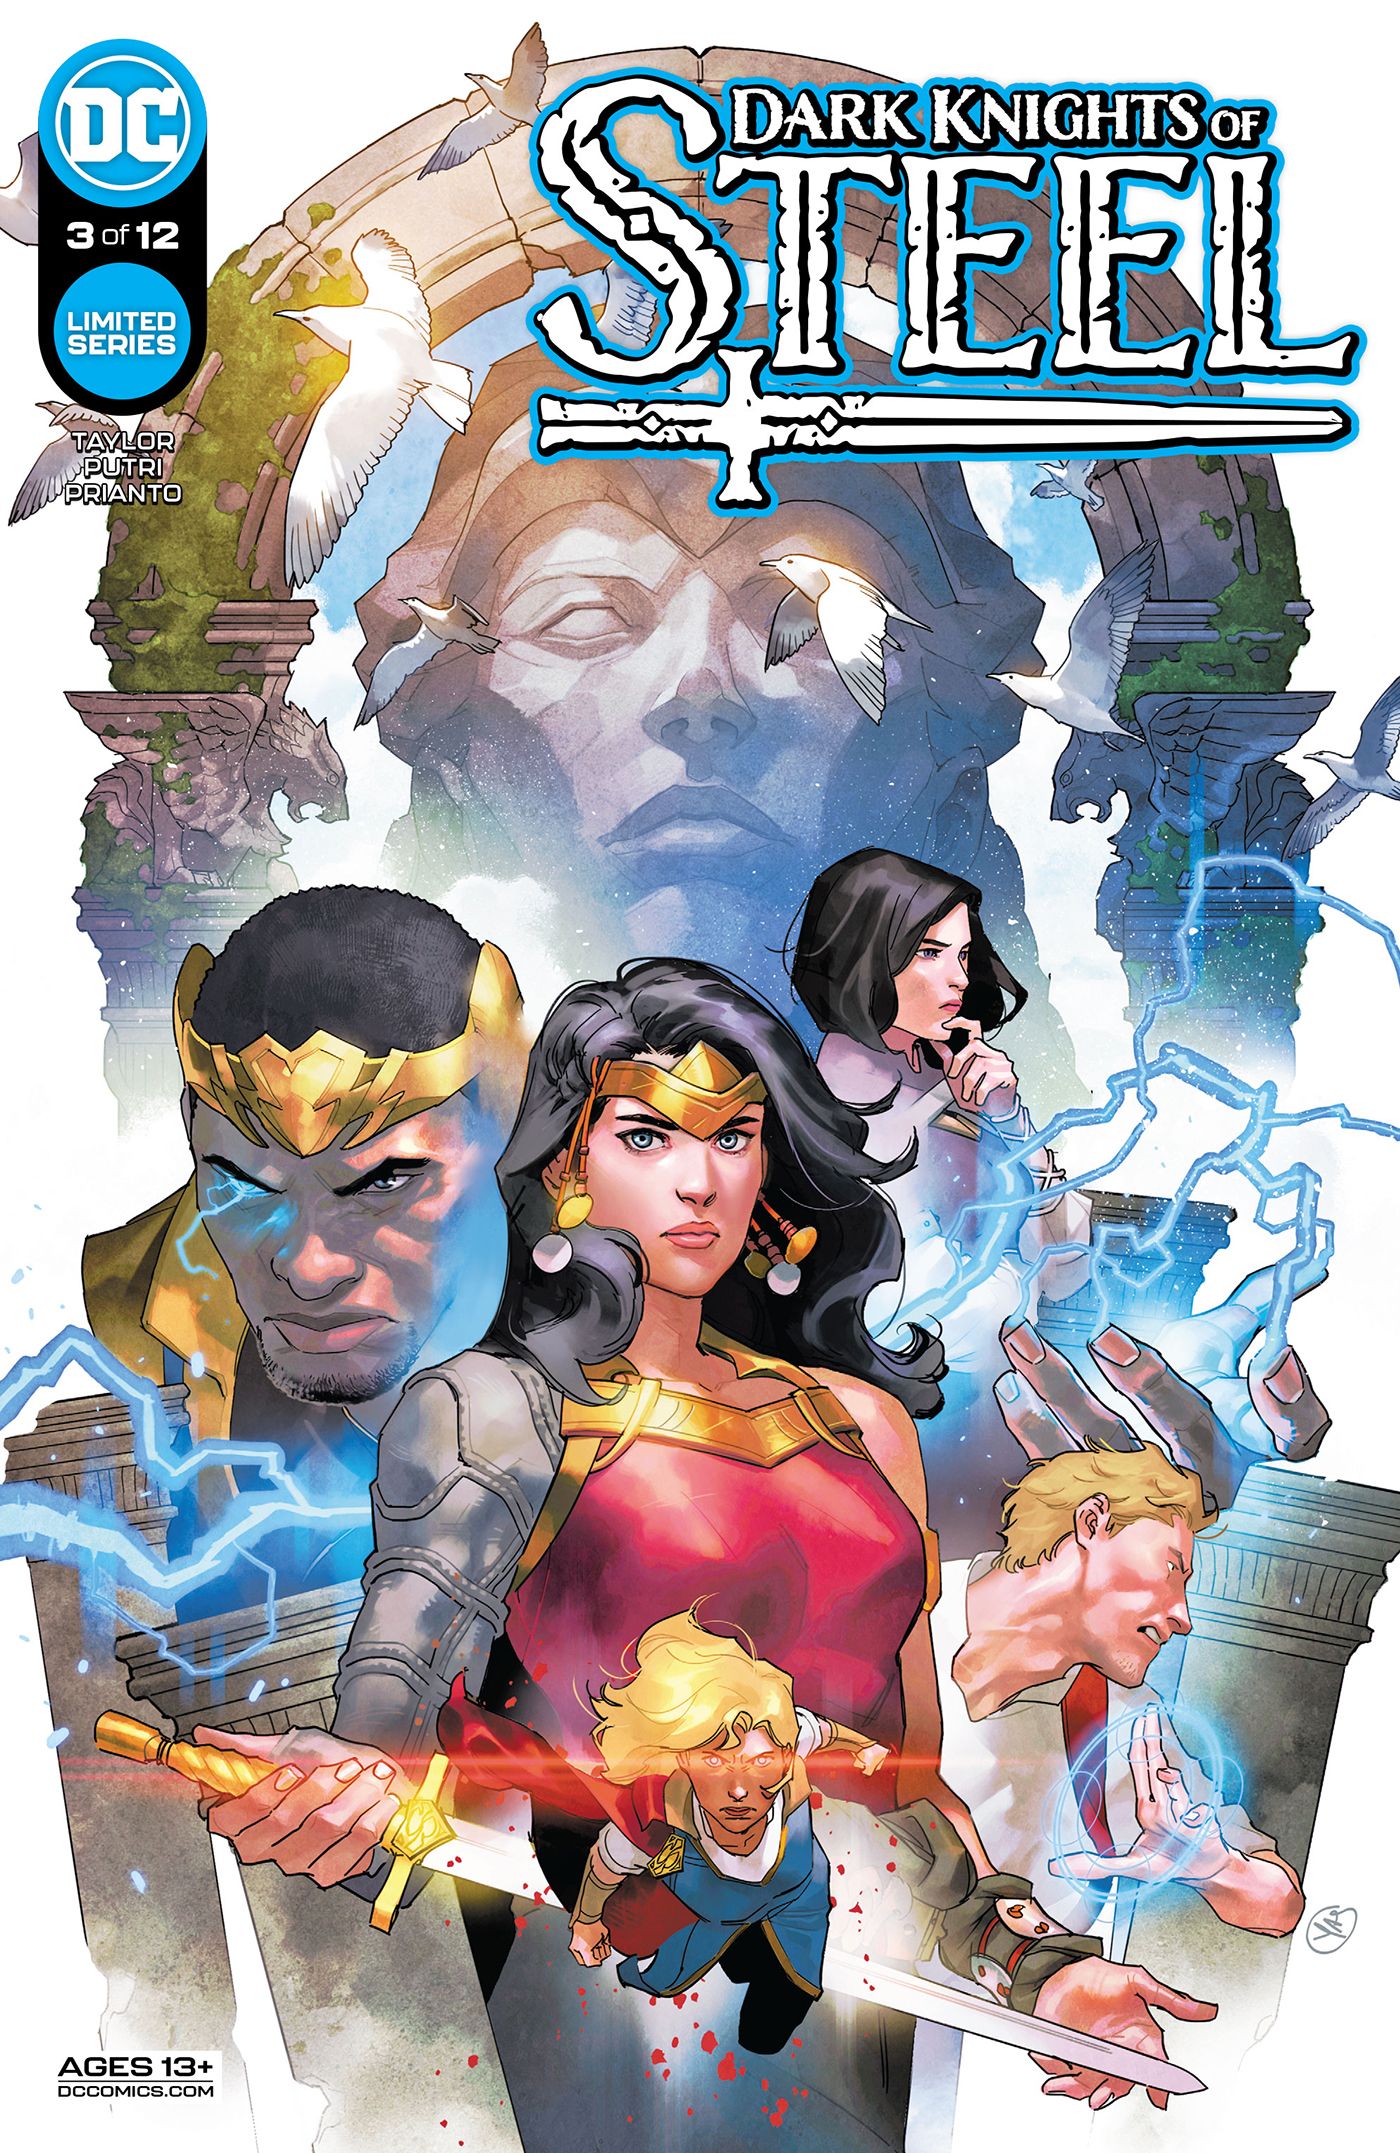 The main cover for Dark Knights of Steel #3 features Black Lightning, Wonder Woman, Lois Lane, John Constantine and Supergirl.